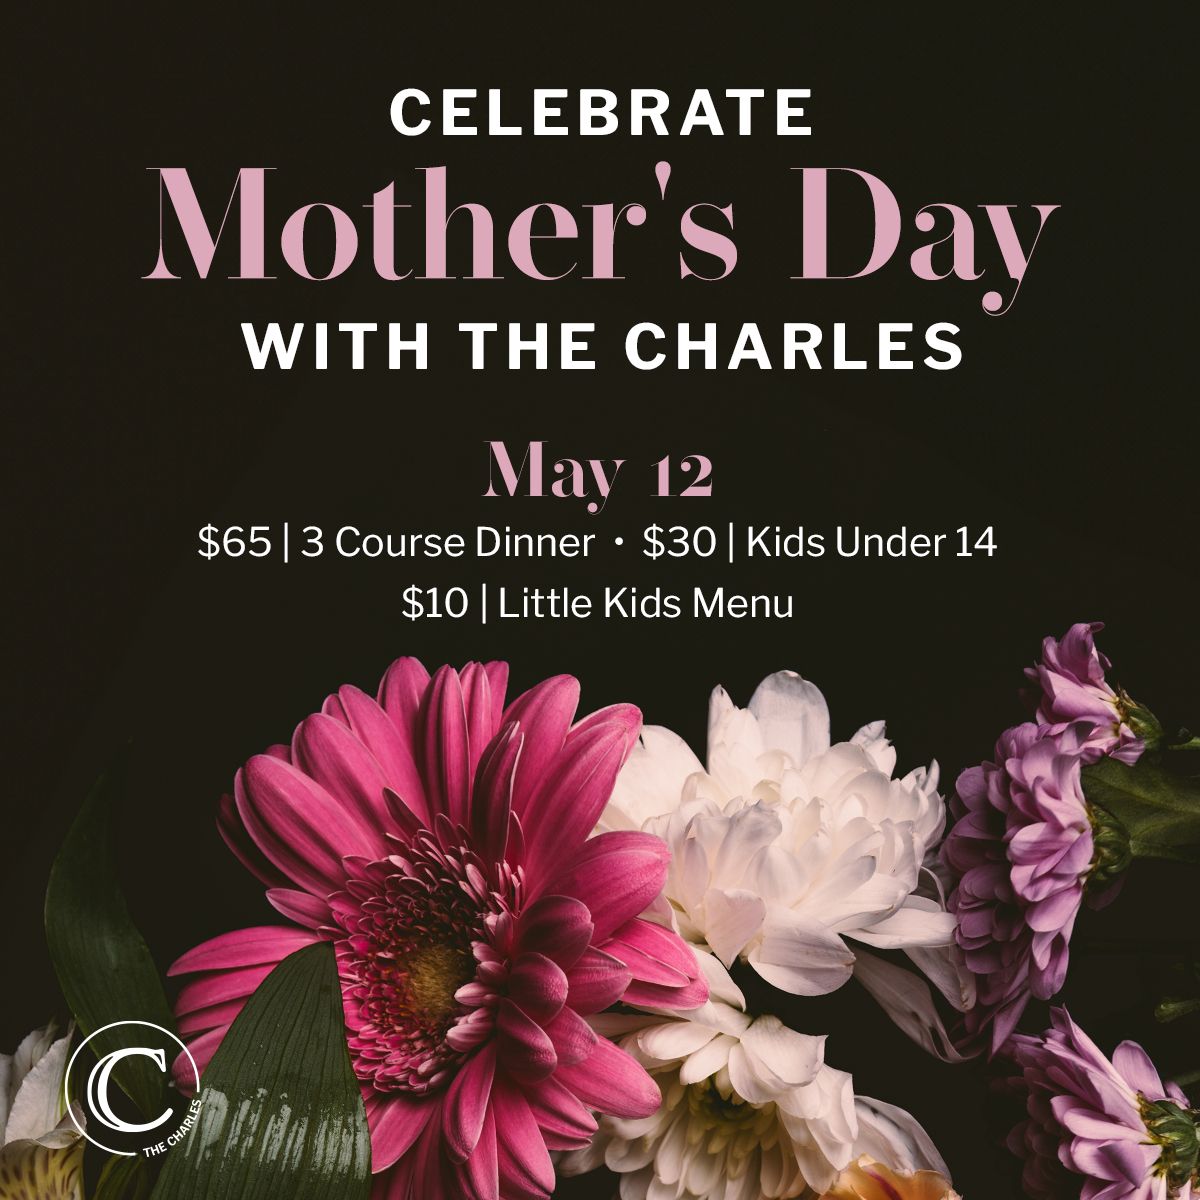 Mother's Day at The Charles